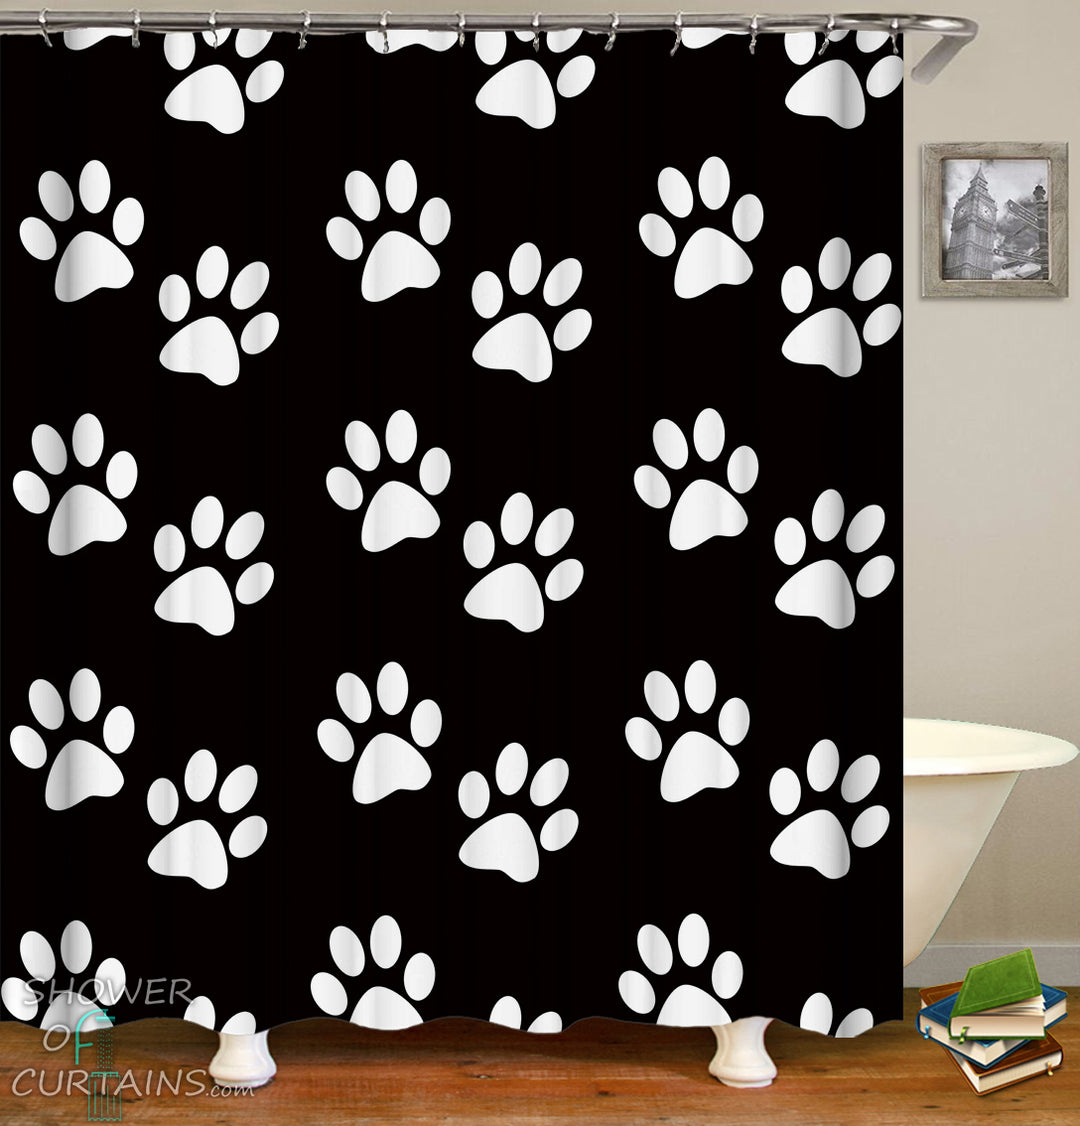 Dog Shower Curtain of White Dogs’ Paws Shower Curtain